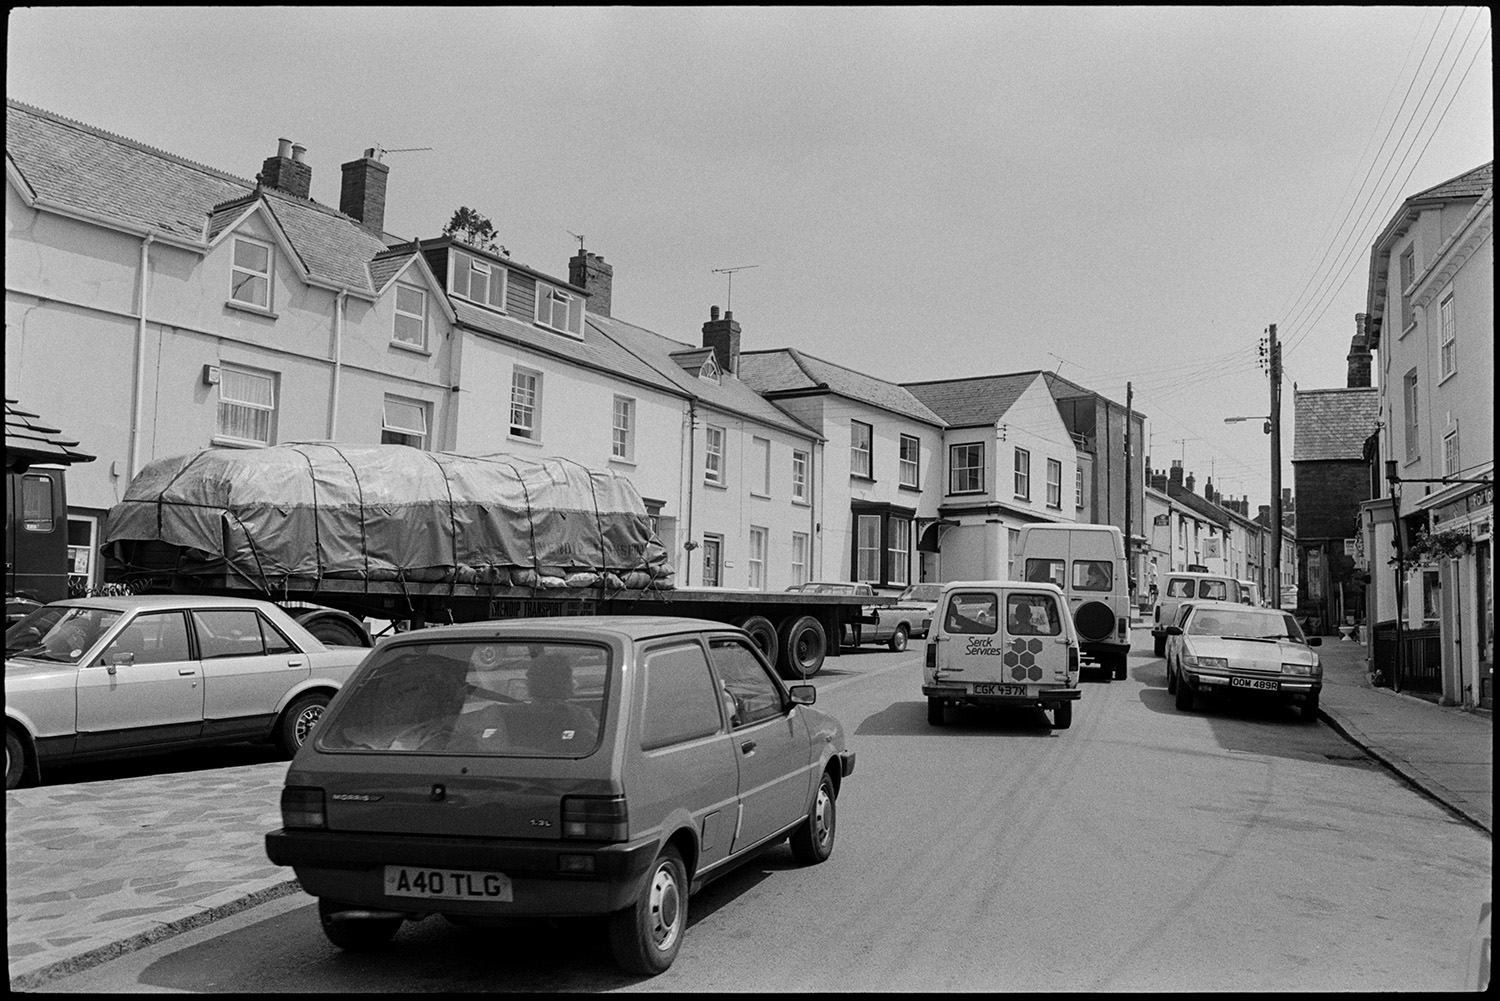 Comparison with old photo. Street scenes. Man mowing lawn. Lorries and cars.
[A busy street in North Tawton with houses, cars, vans and a lorry.]